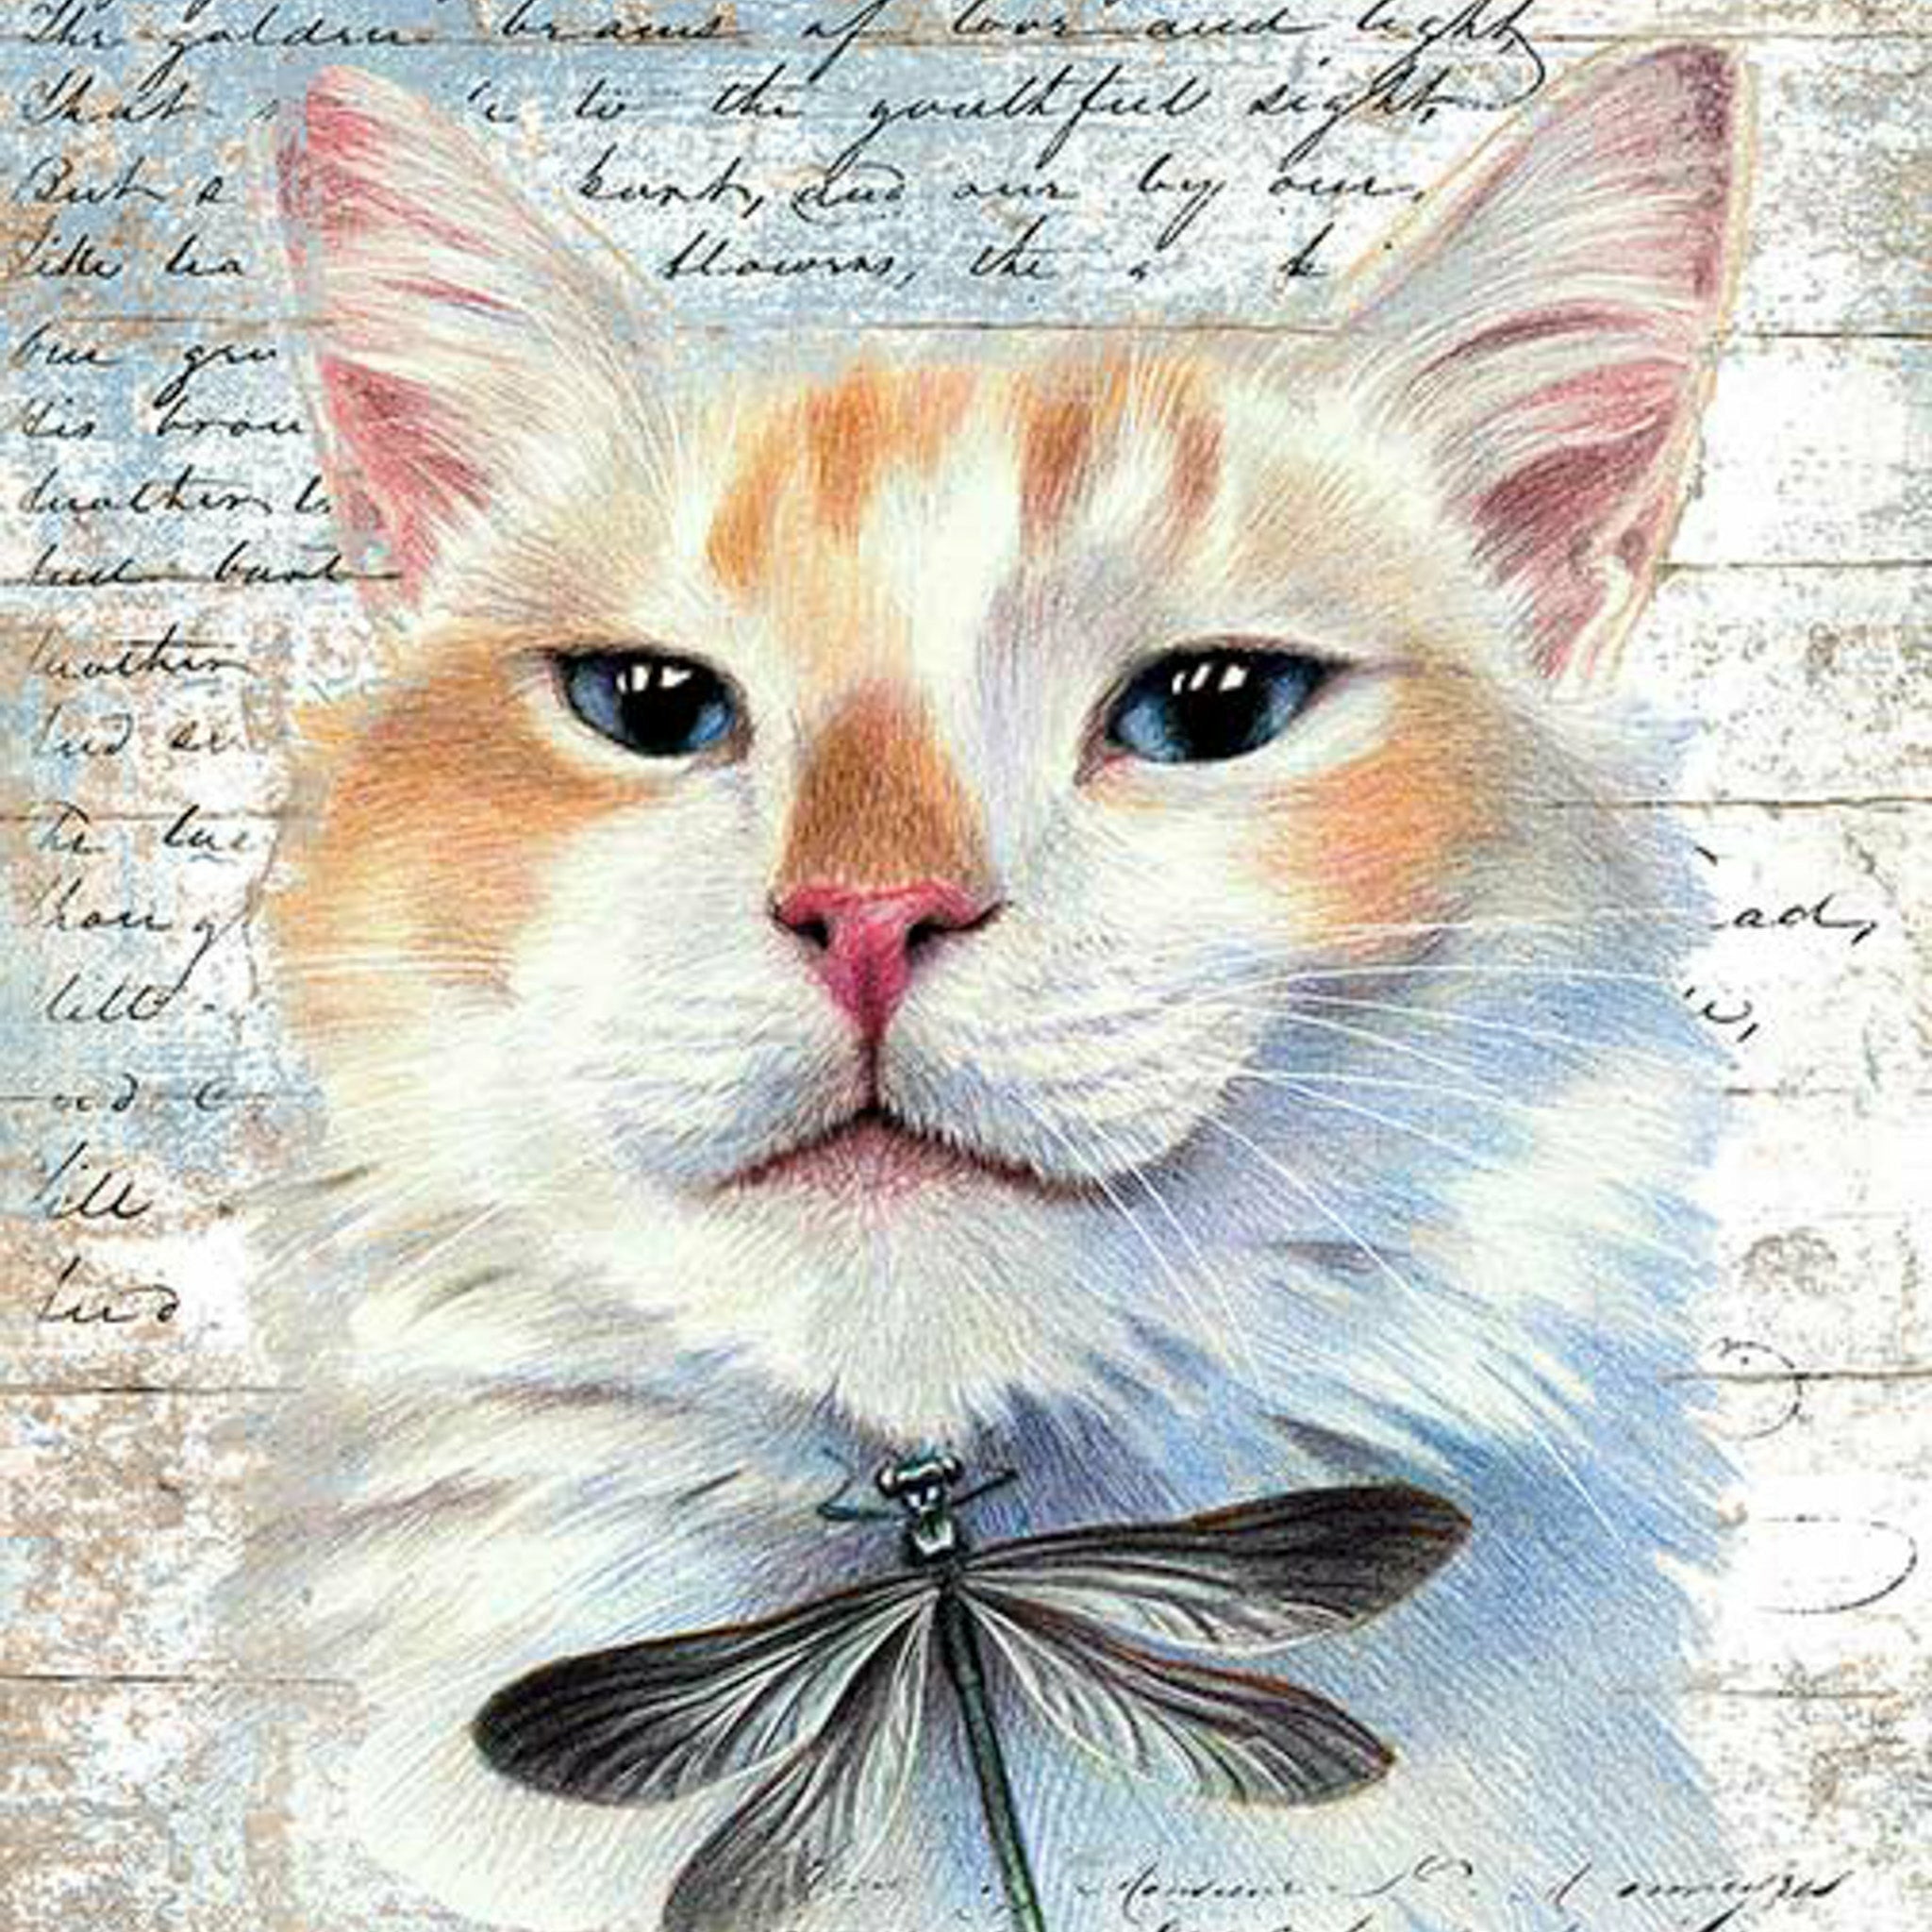 A colorful cat and dragonfly on a cursive text background rice paper designs.